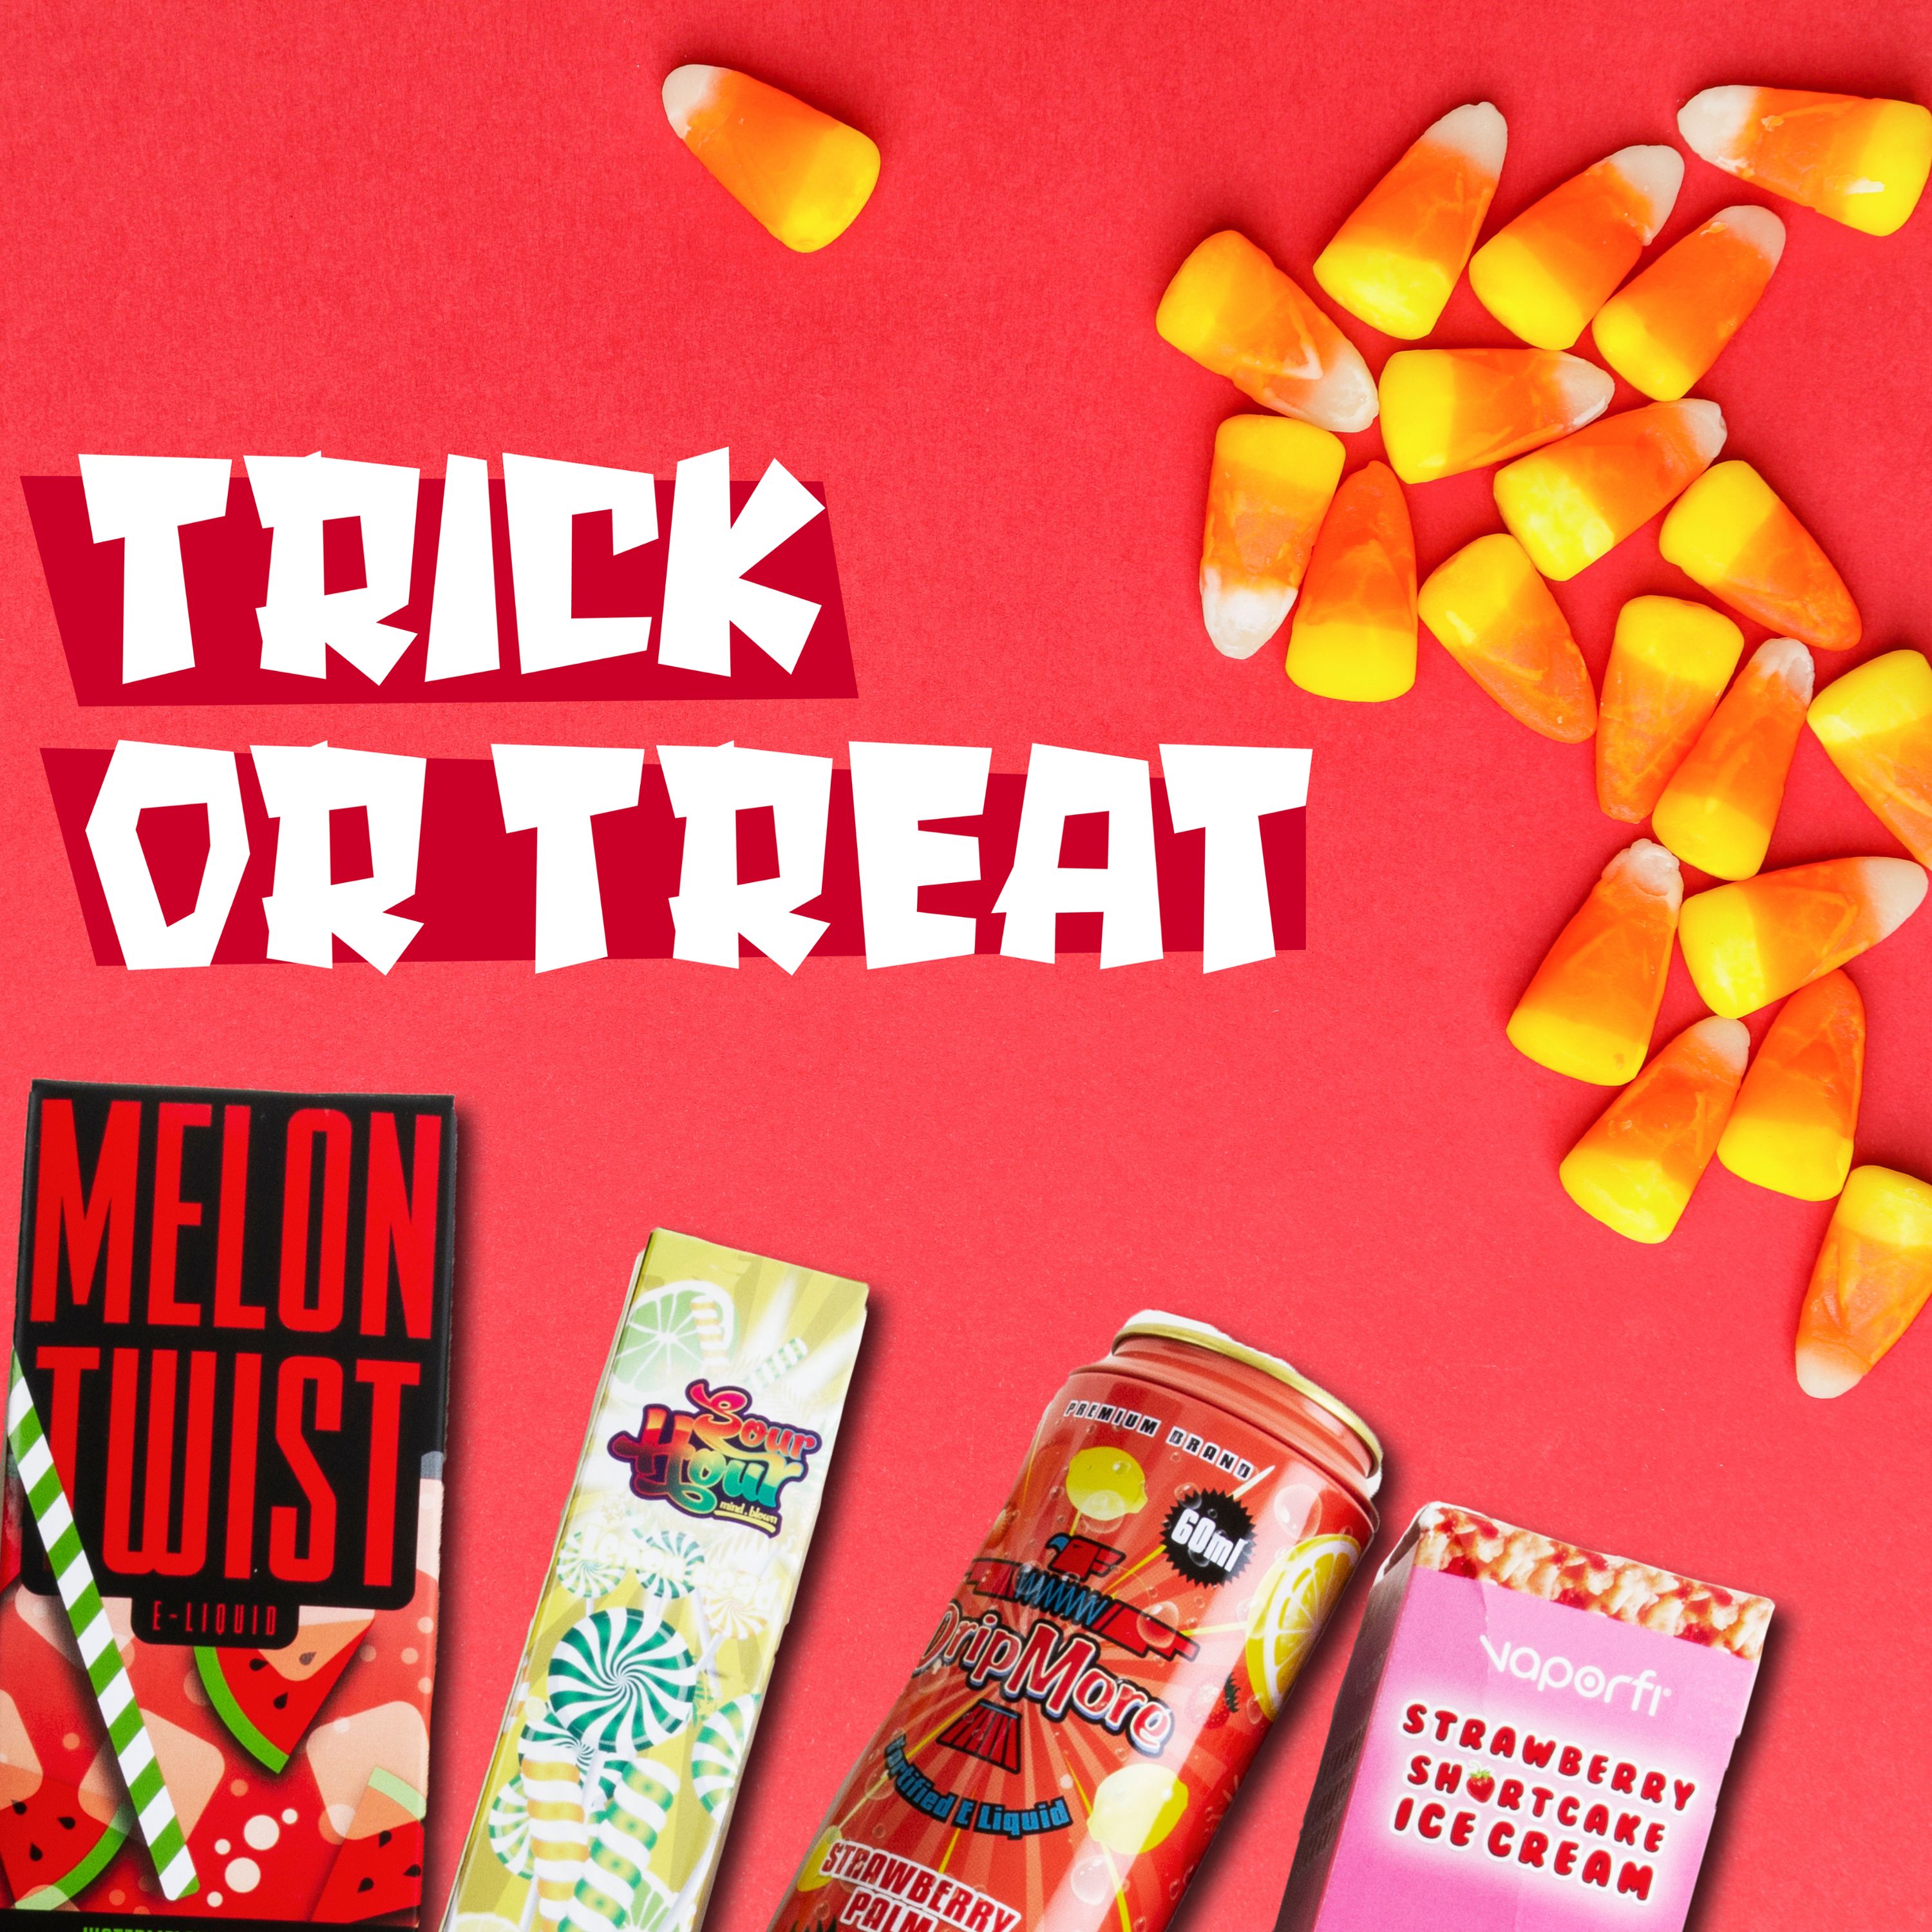 Trick or Treat (includes images of Halloween toys and flavored tobacco products)